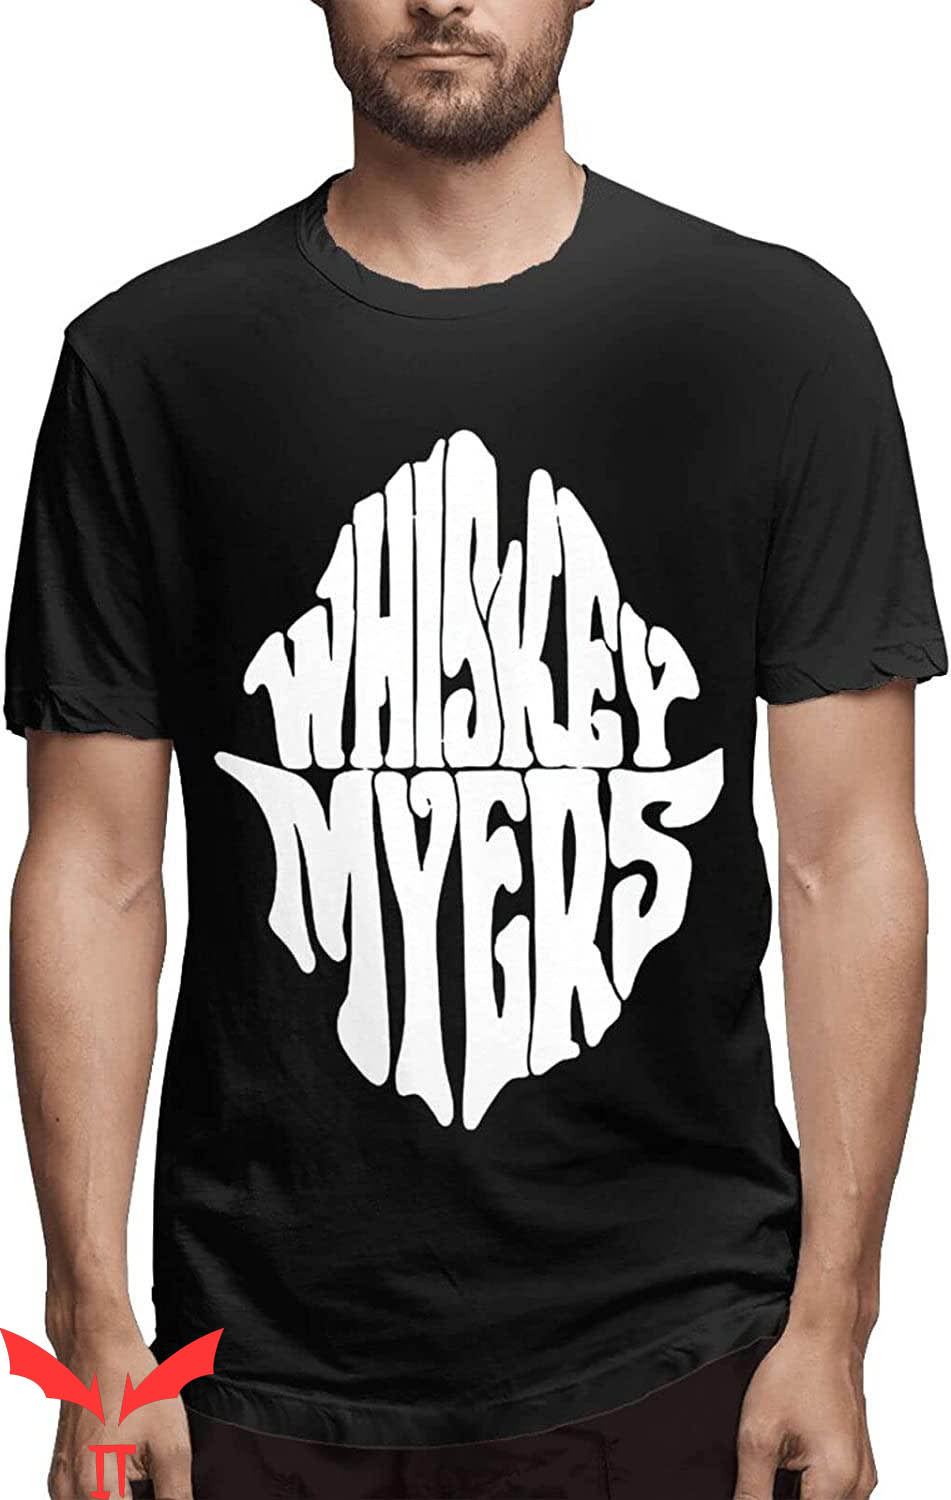 Whiskey Myers T-Shirt Cool Sports Running Rock Country